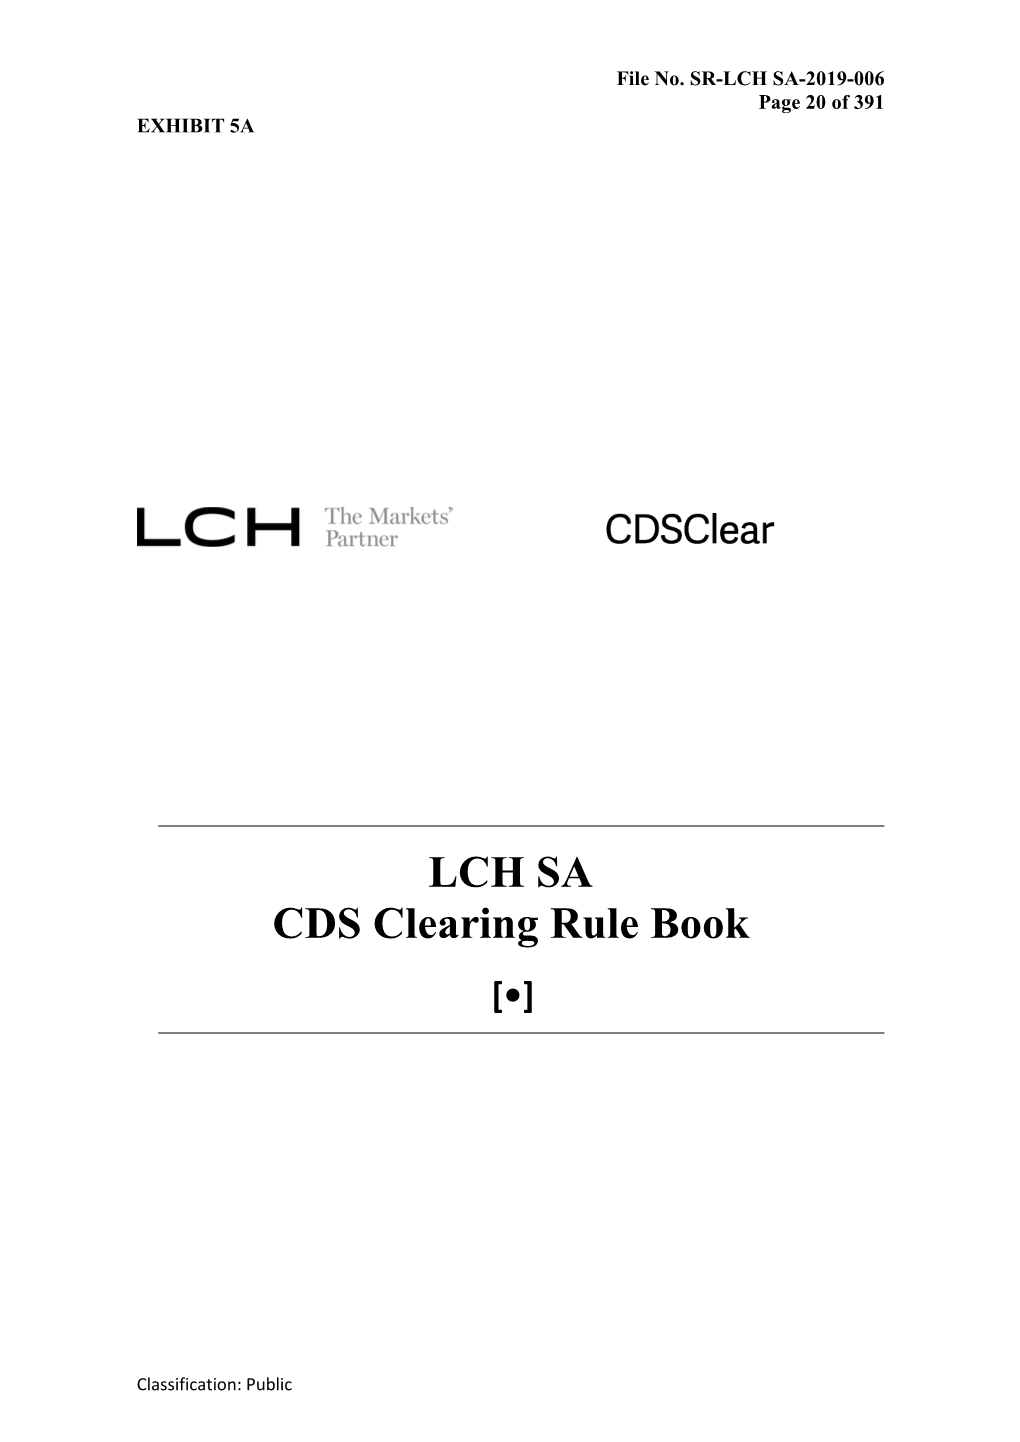 LCH SA CDS Clearing Rule Book